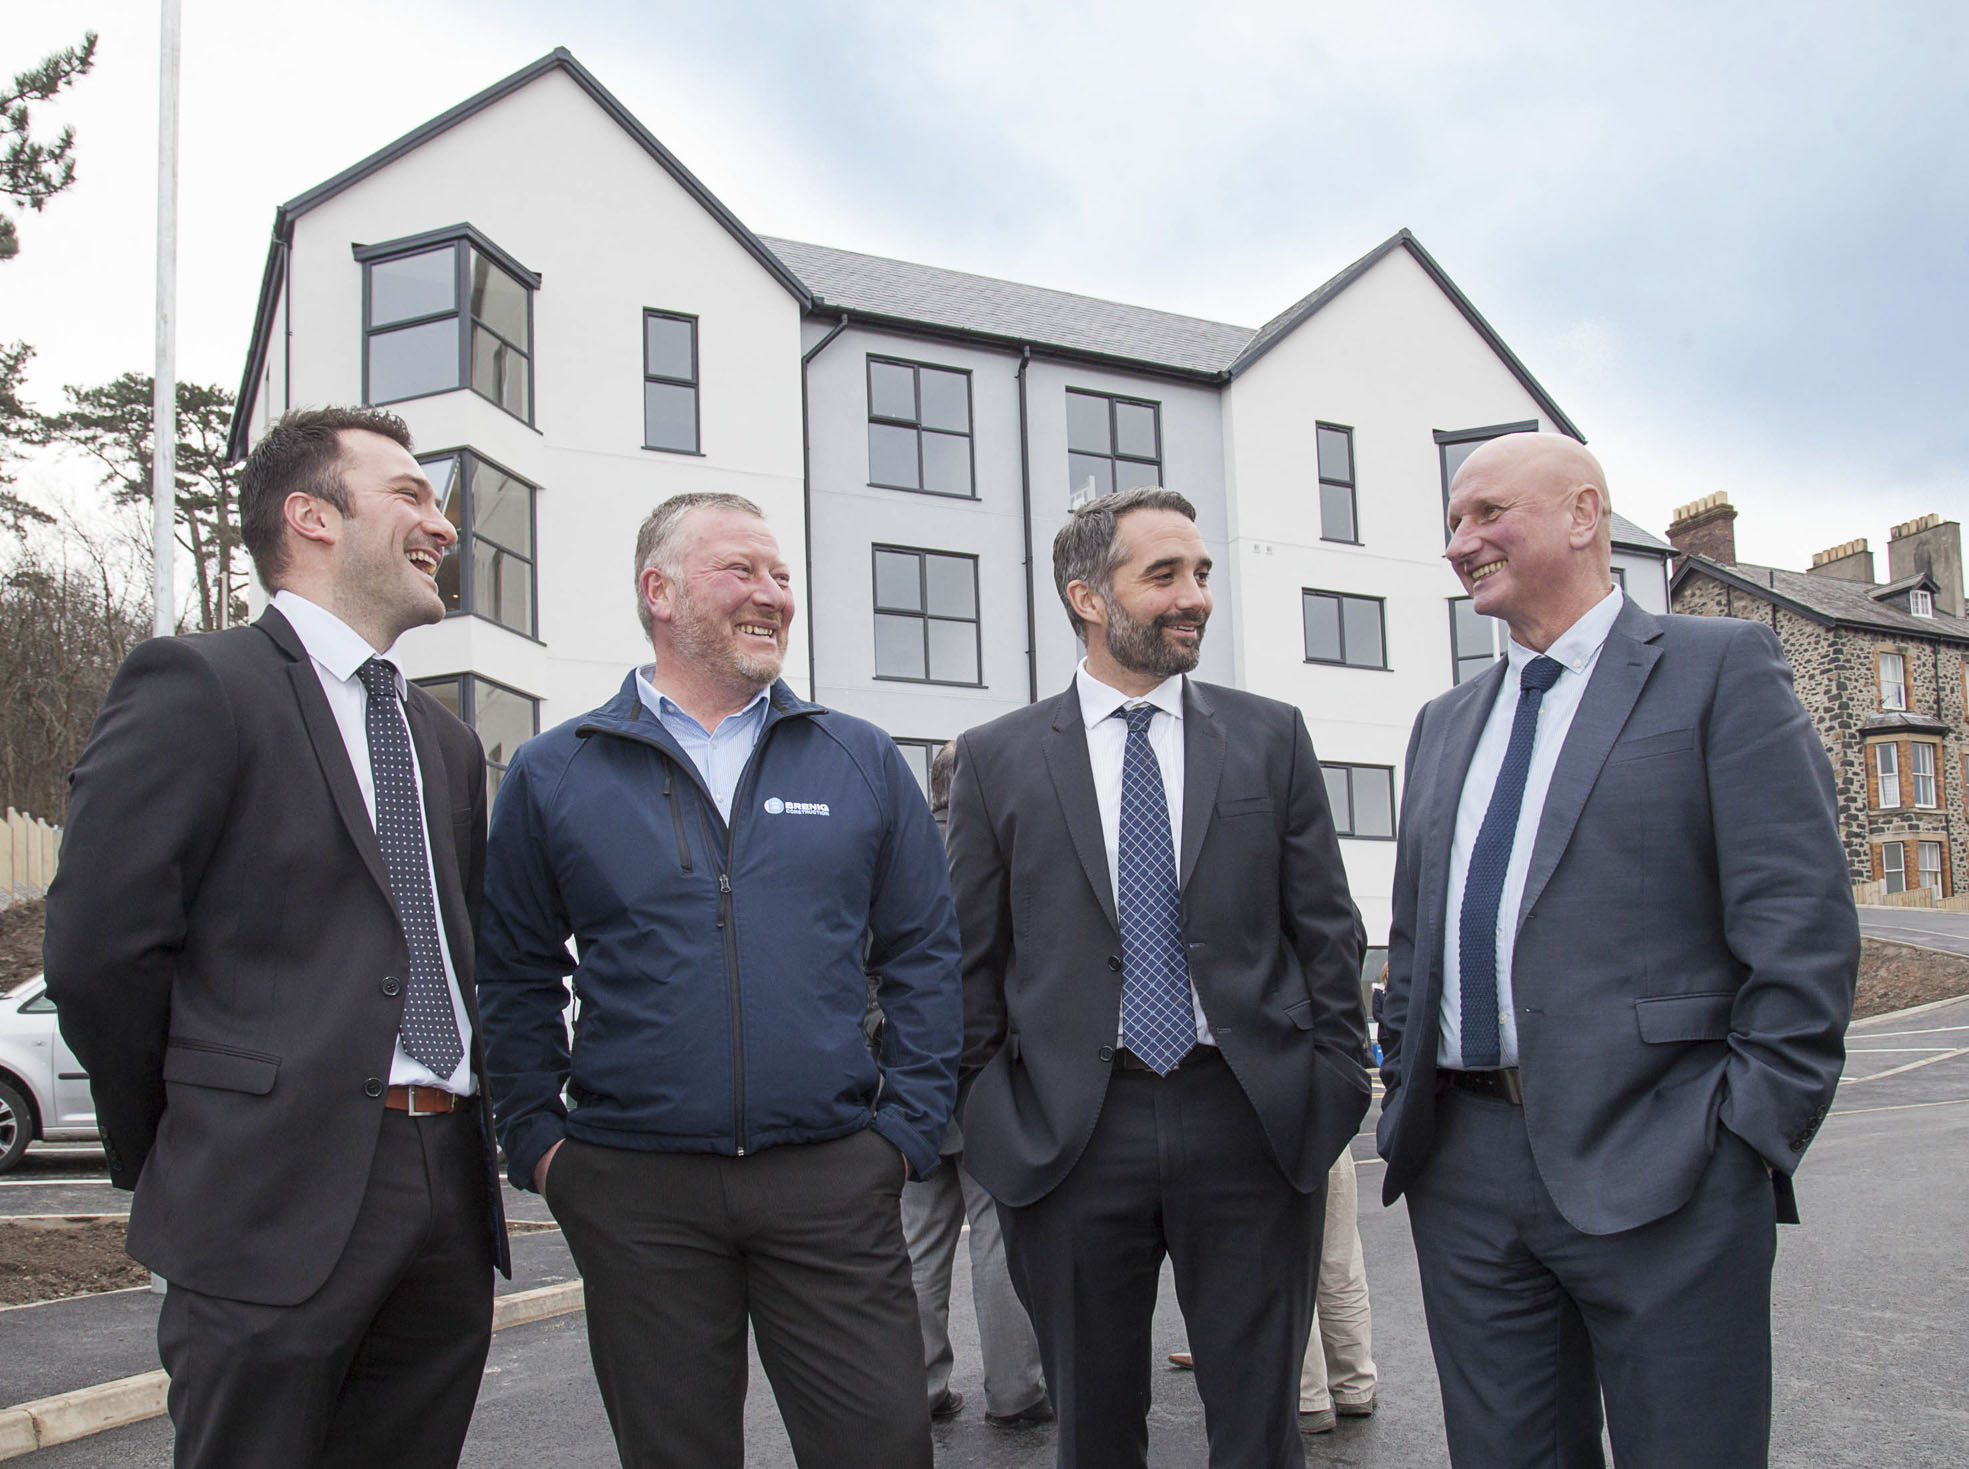 £3.4m economy boosting new homes scheme takes a bow